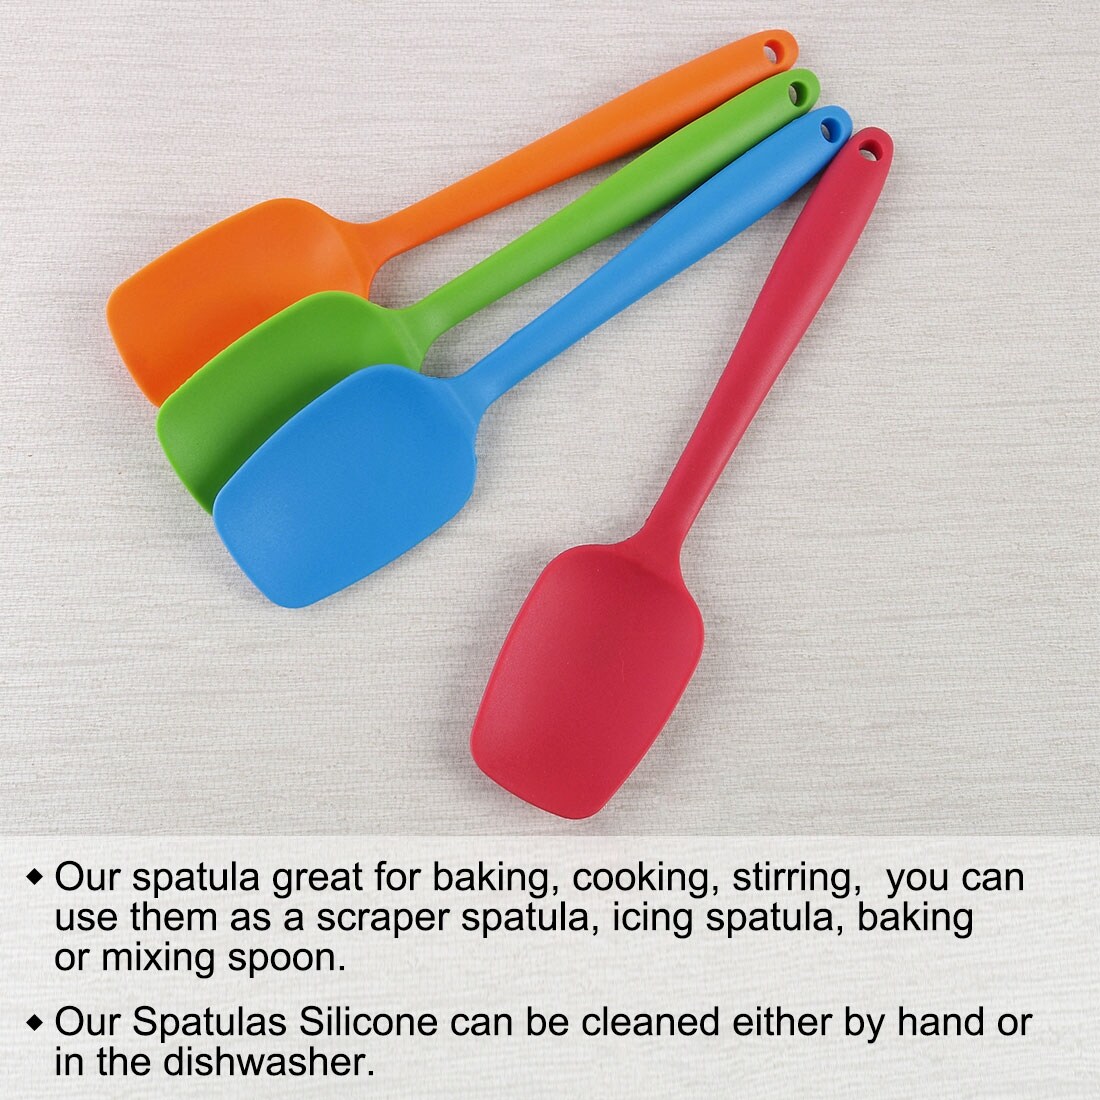 https://ak1.ostkcdn.com/images/products/is/images/direct/44d0e6324a4023d6479a6c7f530b806abd04f187/Silicone-Spatula-Heat-Resistant-Rubber-Flipping-Turner-for-Cooking.jpg